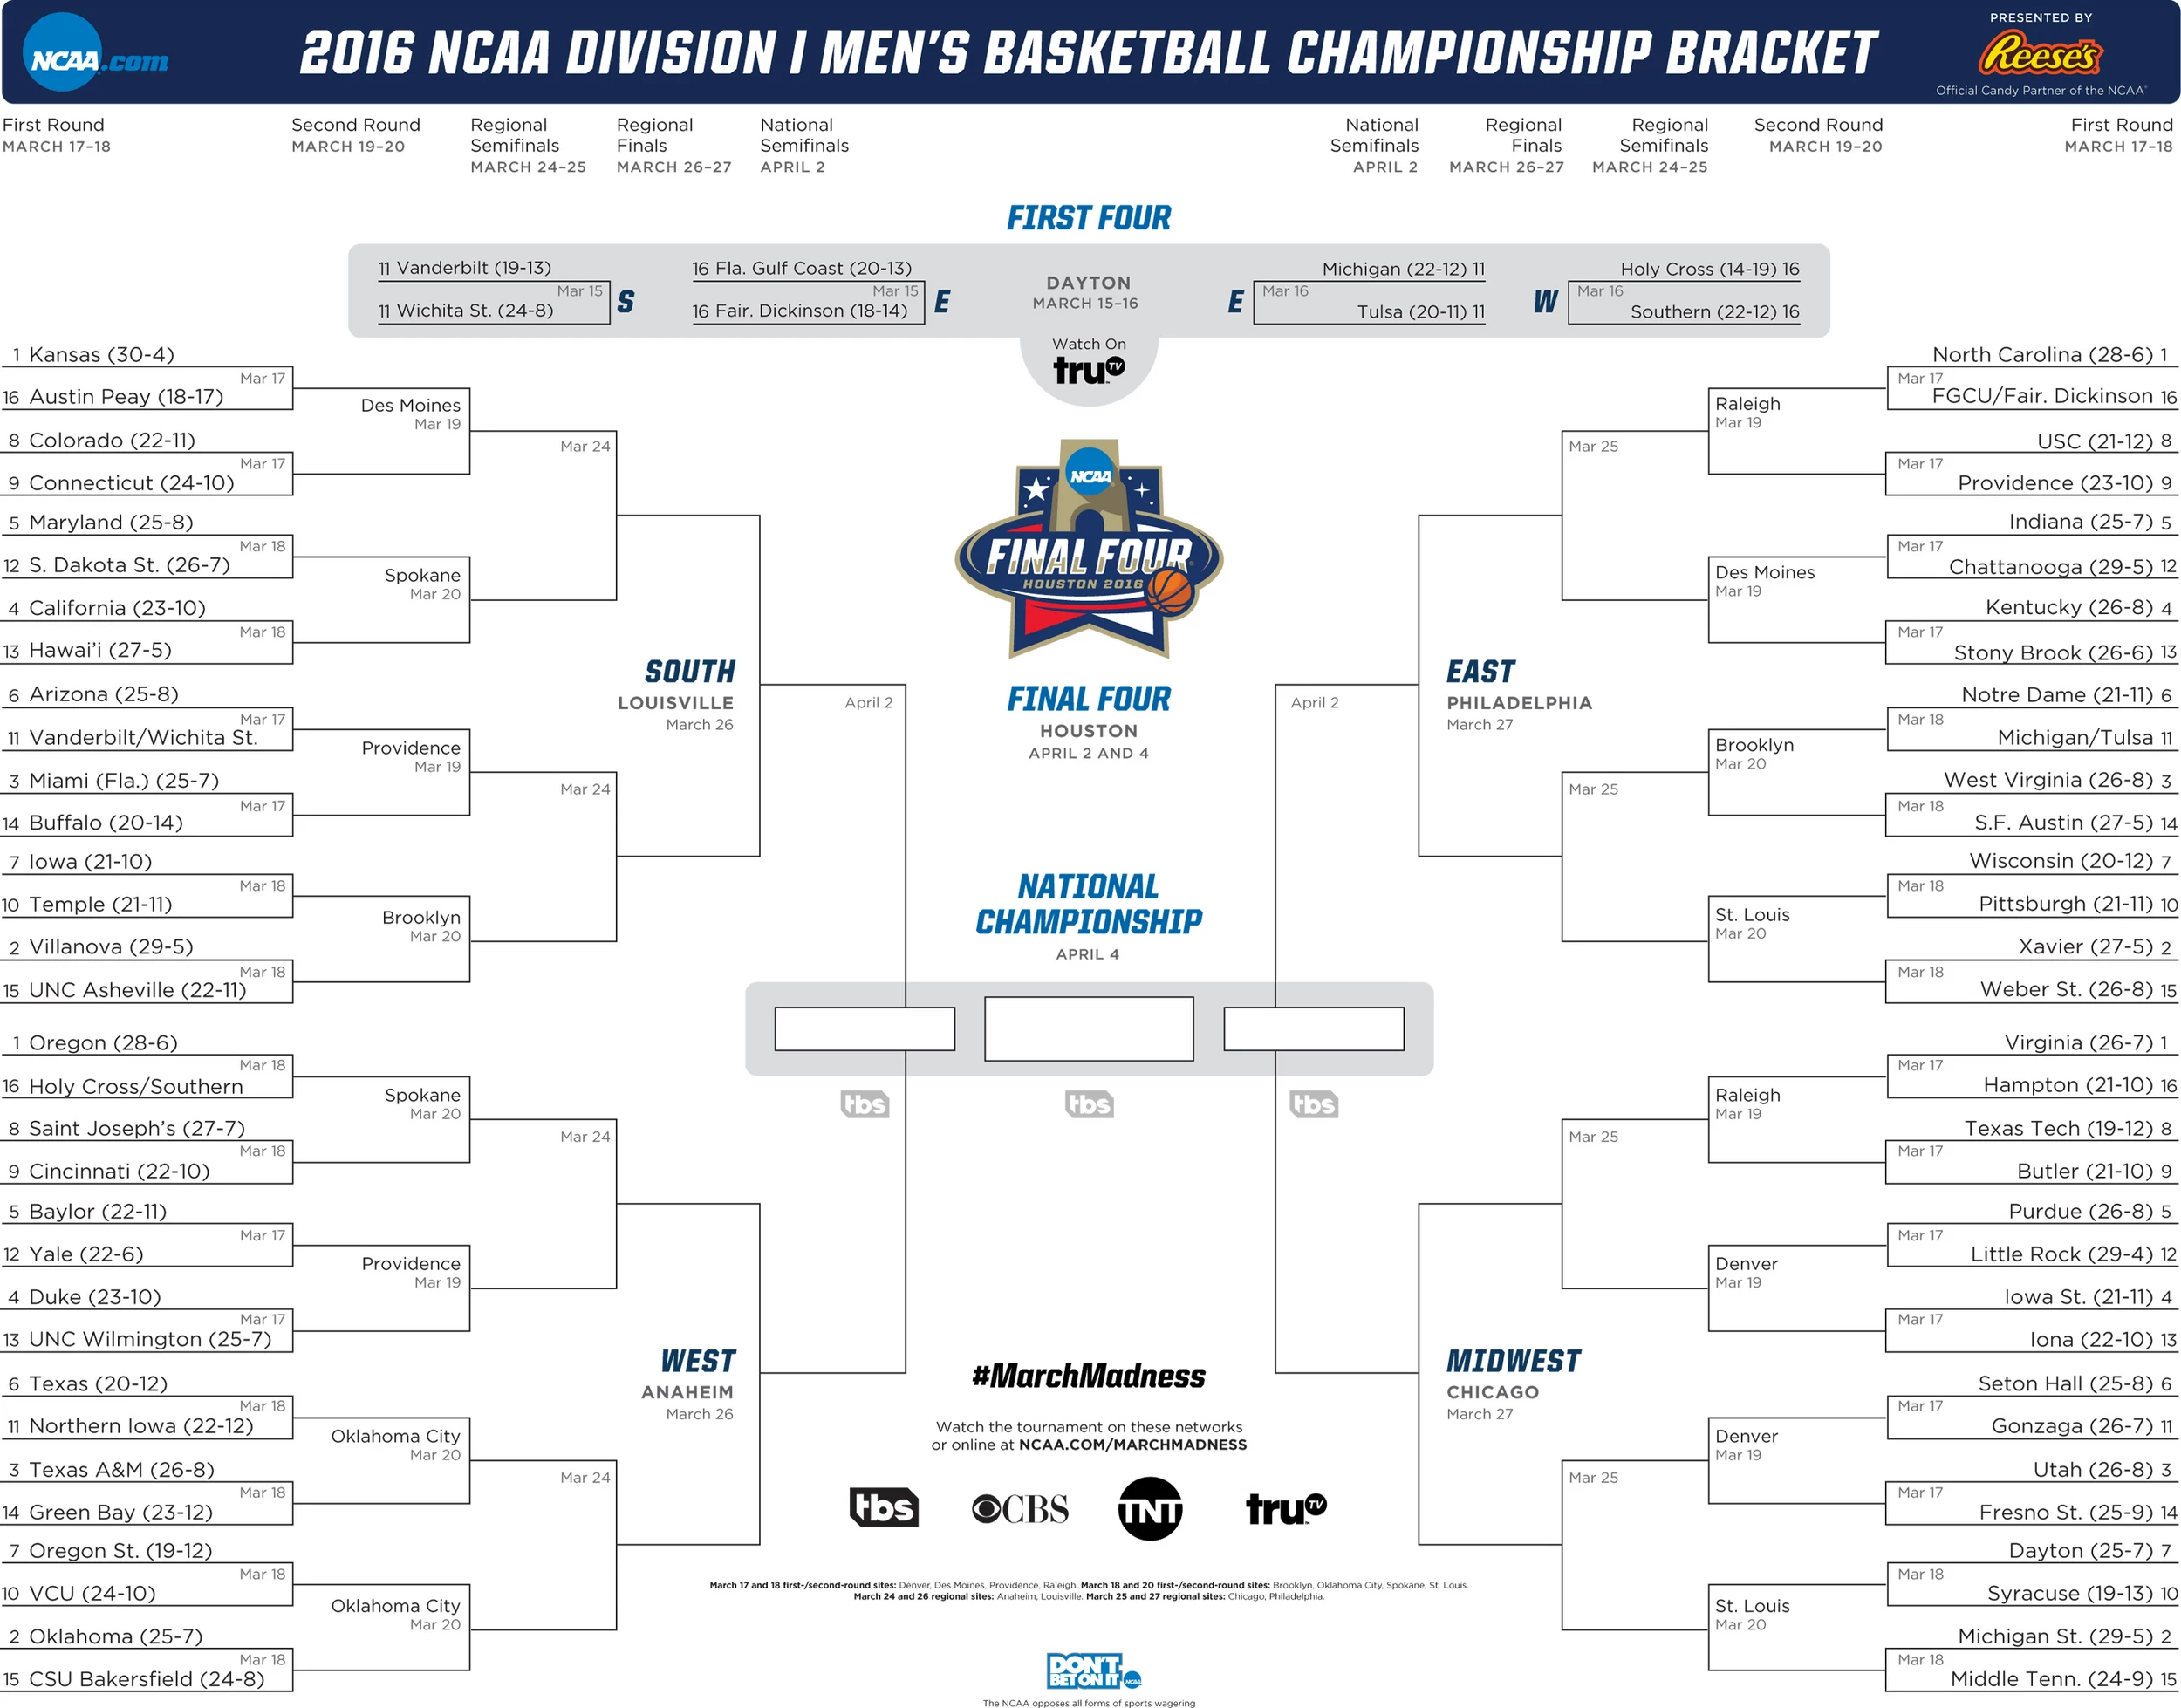 2016 NCAA Tournament Preview: Win Your March Madness Bracket